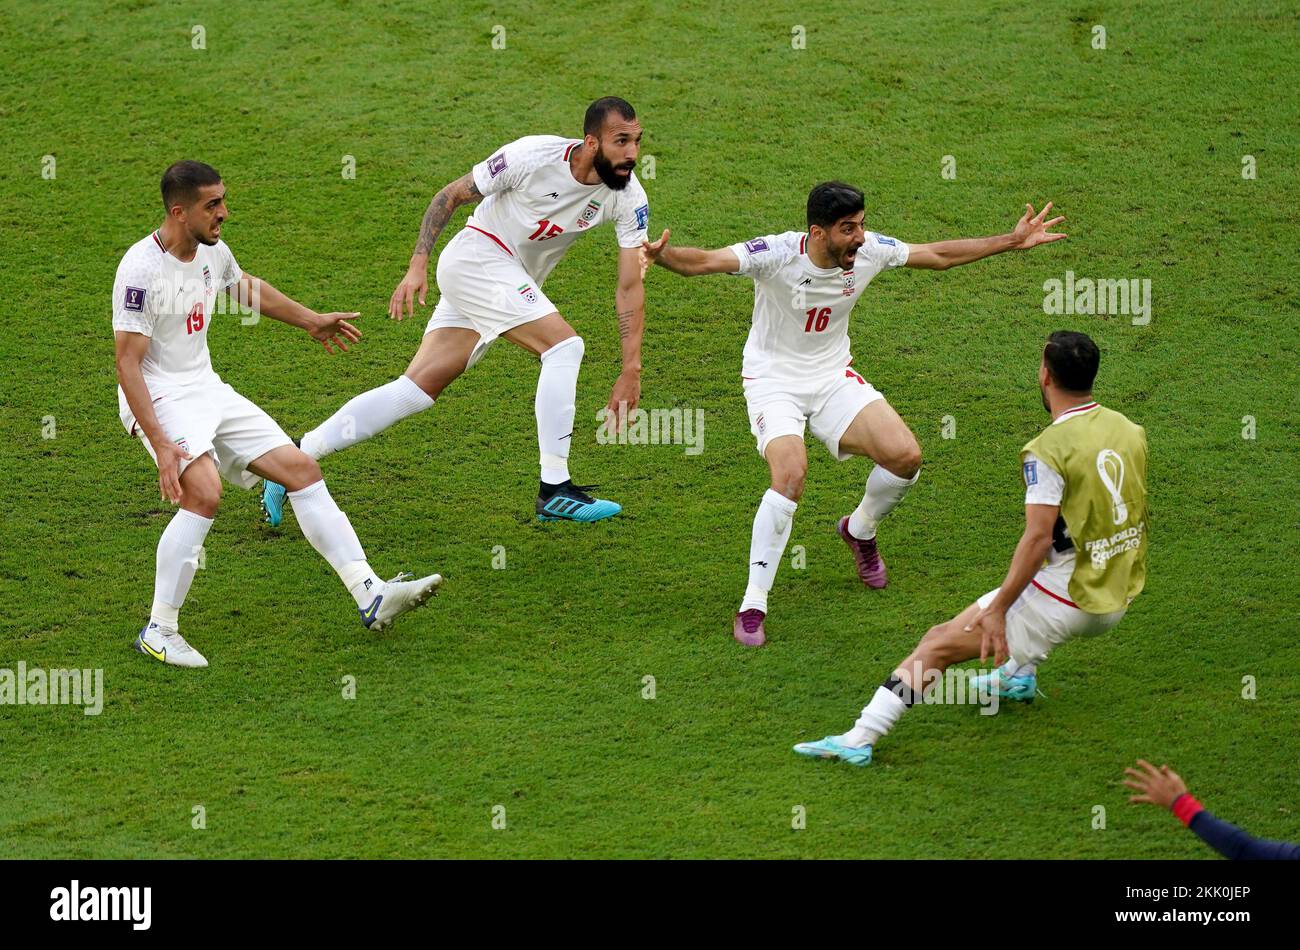 Iran's Roozbeh Cheshmi celebrates scoring the opening goal during the FIFA World Cup Group B match at the Ahmad Bin Ali Stadium, Al-Rayyan. Picture date: Friday November 25, 2022. Stock Photo